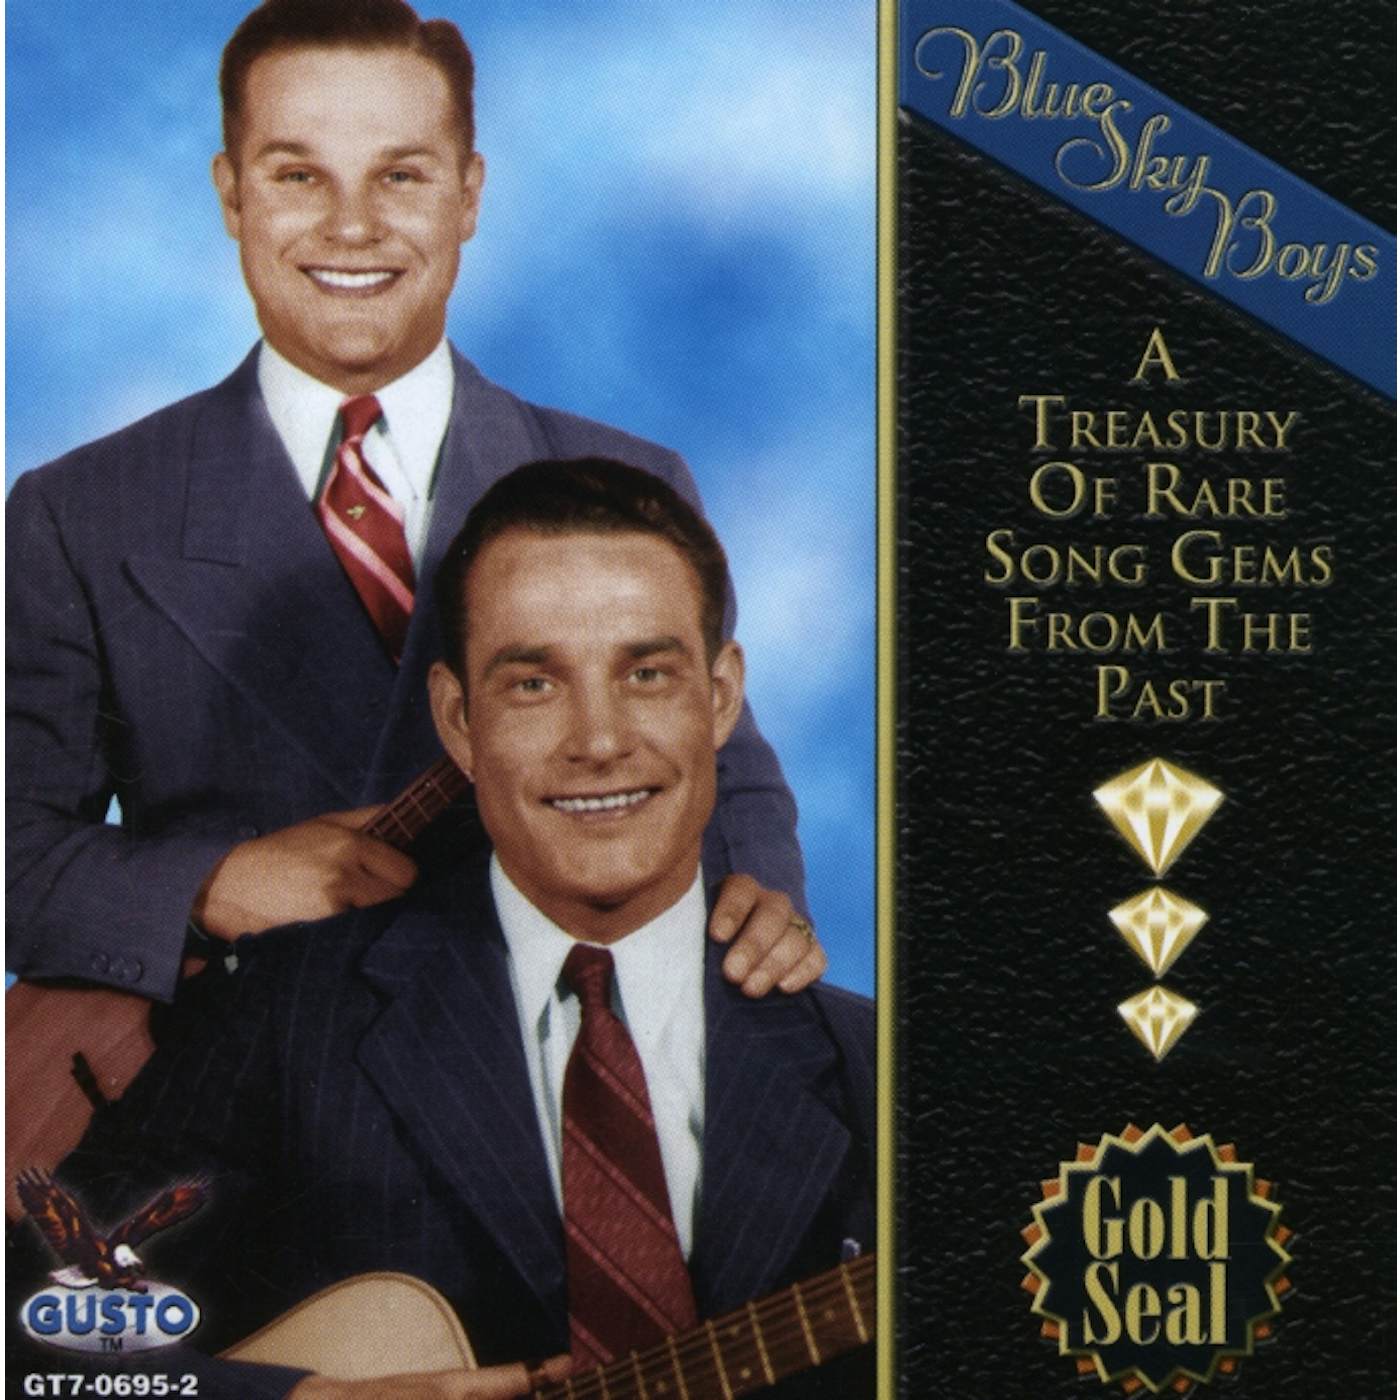 The Blue Sky Boys TREASURY OF RARE SONG GEMS FROM THE PAST CD